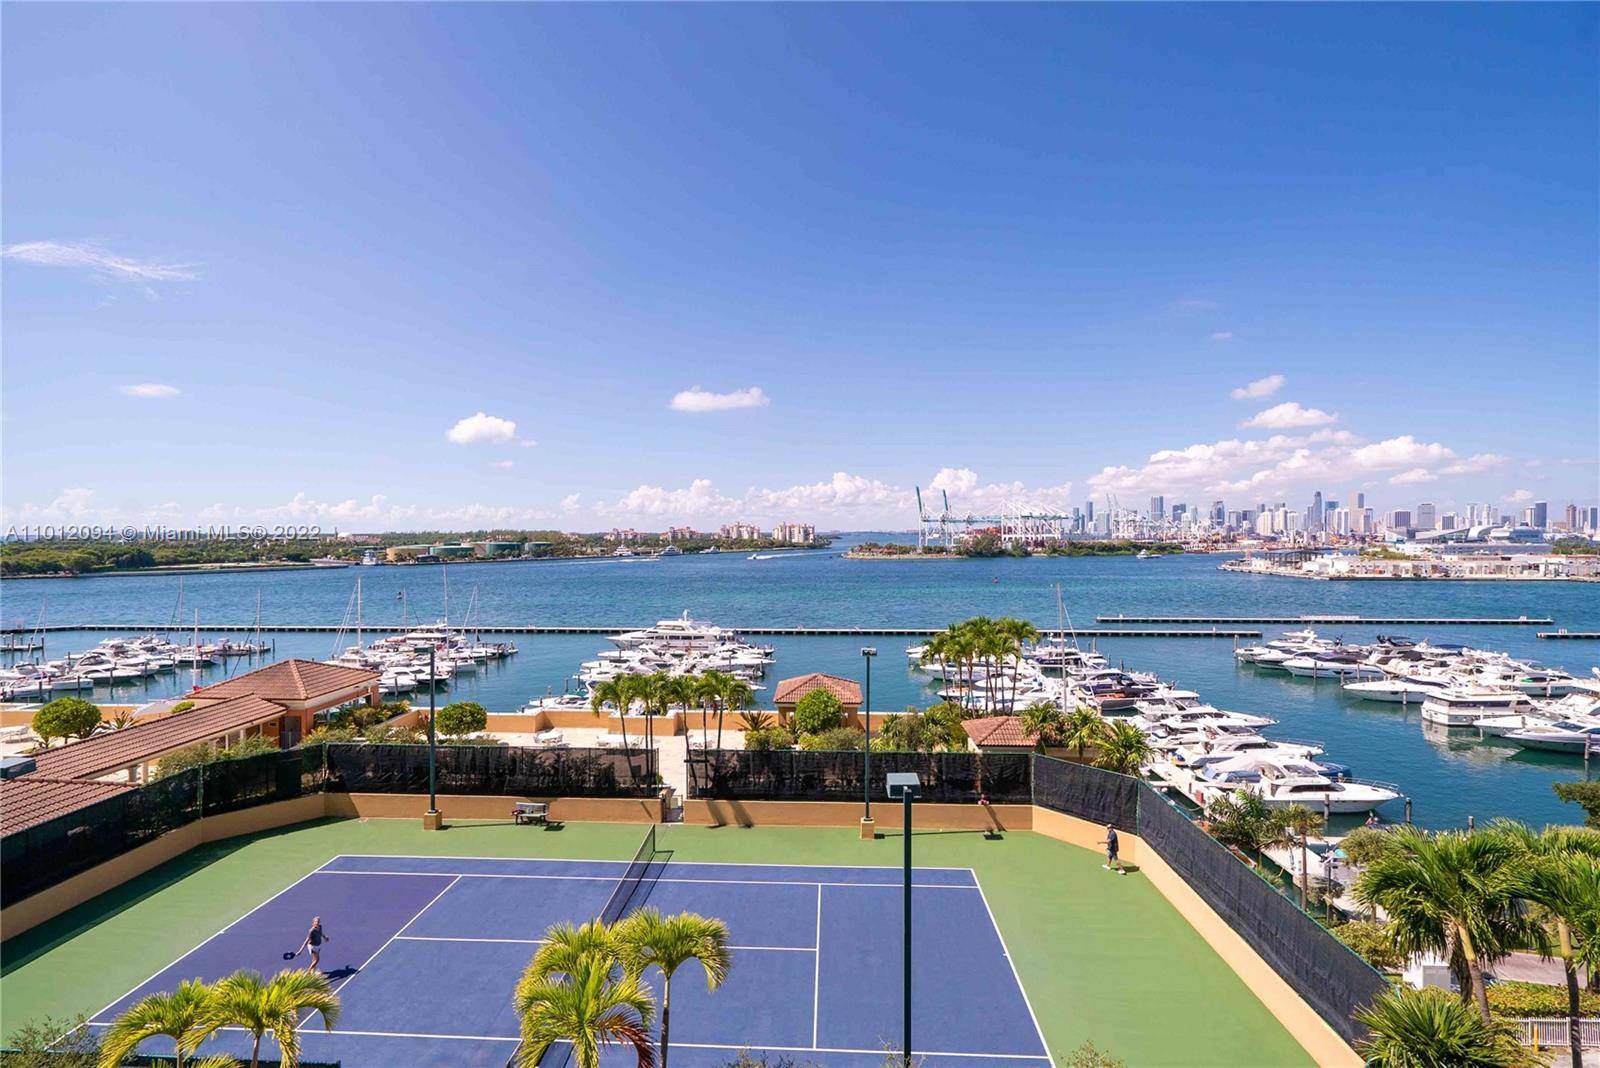 FABULOUS 2 BED 2 BATH CORNER UNIT SOUTH OF 5TH STREET WITH BREATHTAKING BAY, DOWNTOWN BISCAYNE BAY VIEWS.